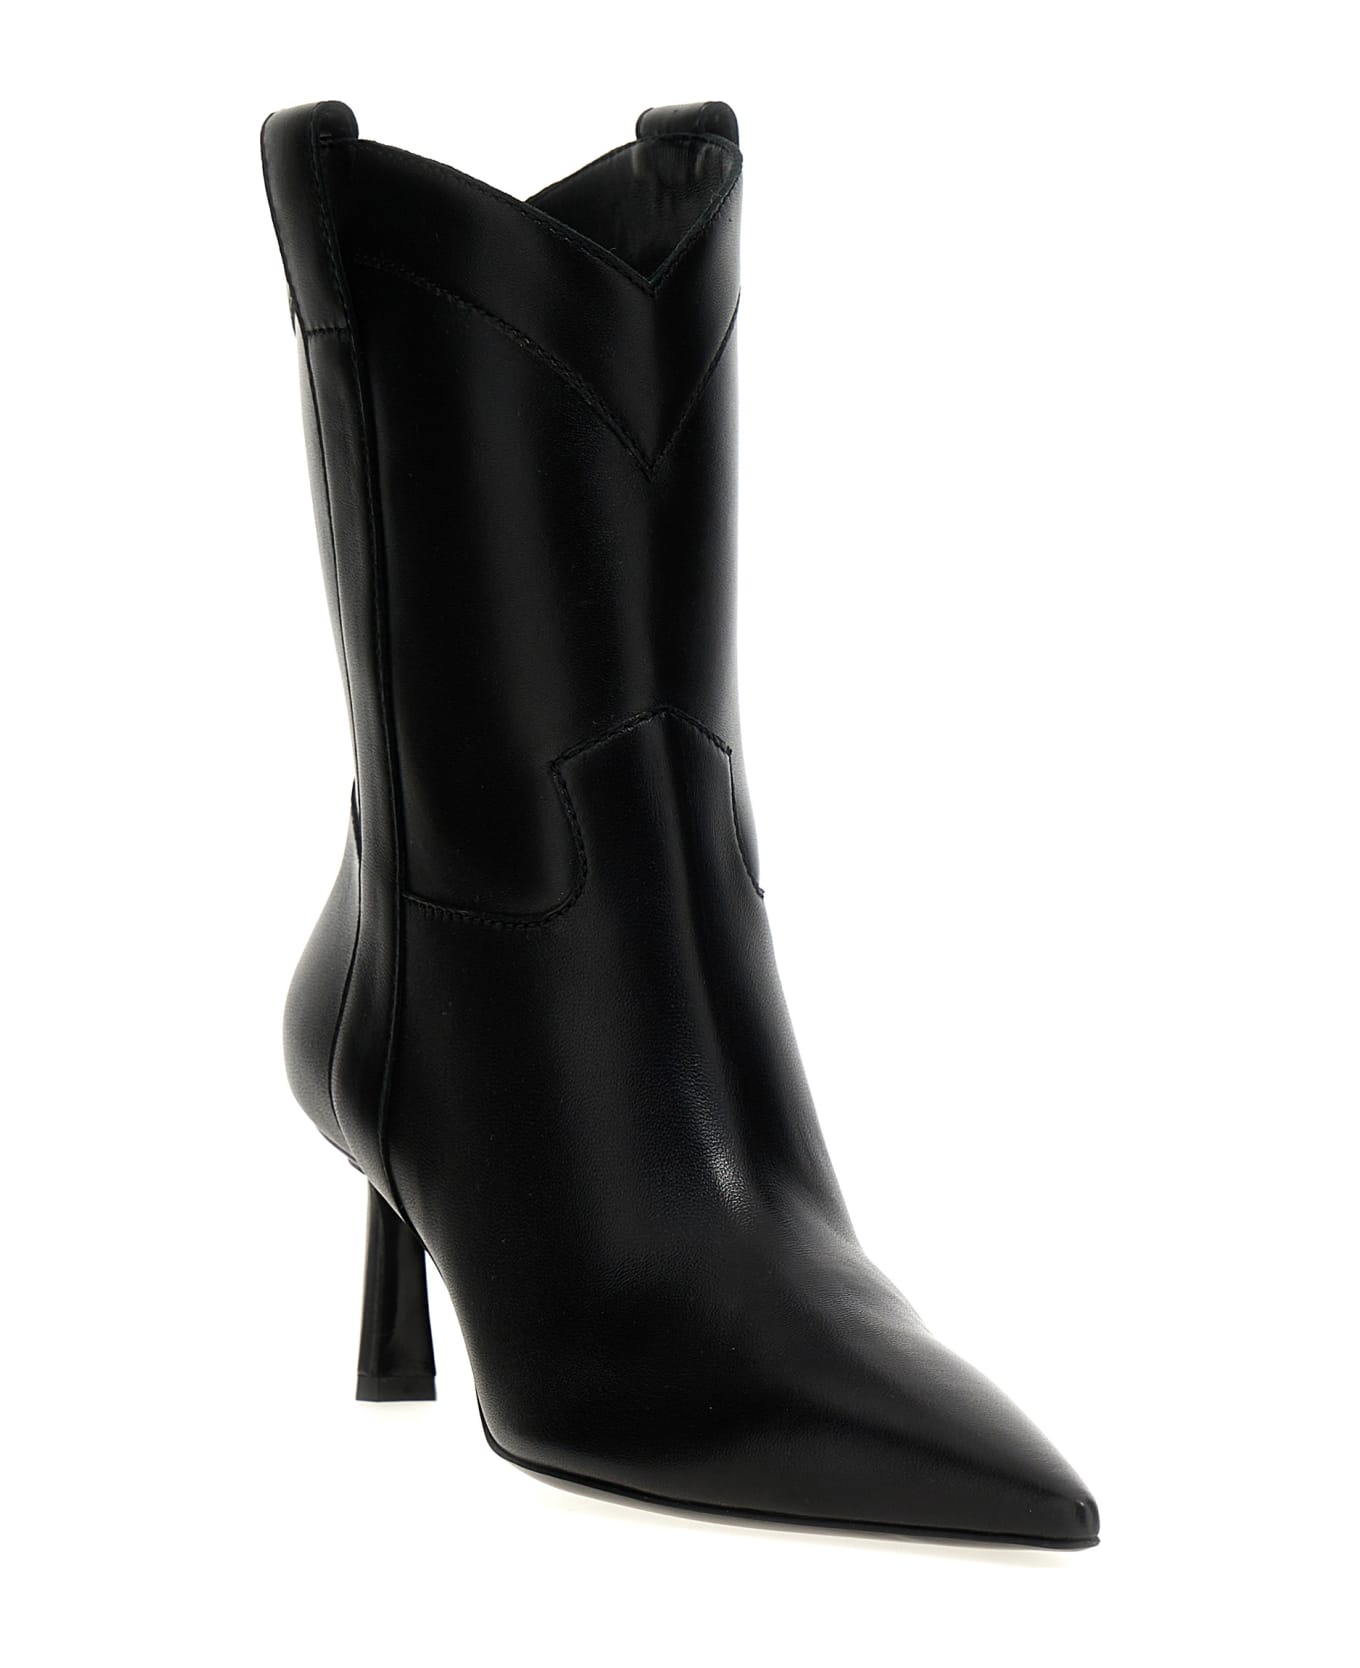 Sergio Rossi 'guadalupe' Ankle Boots - Black   ブーツ